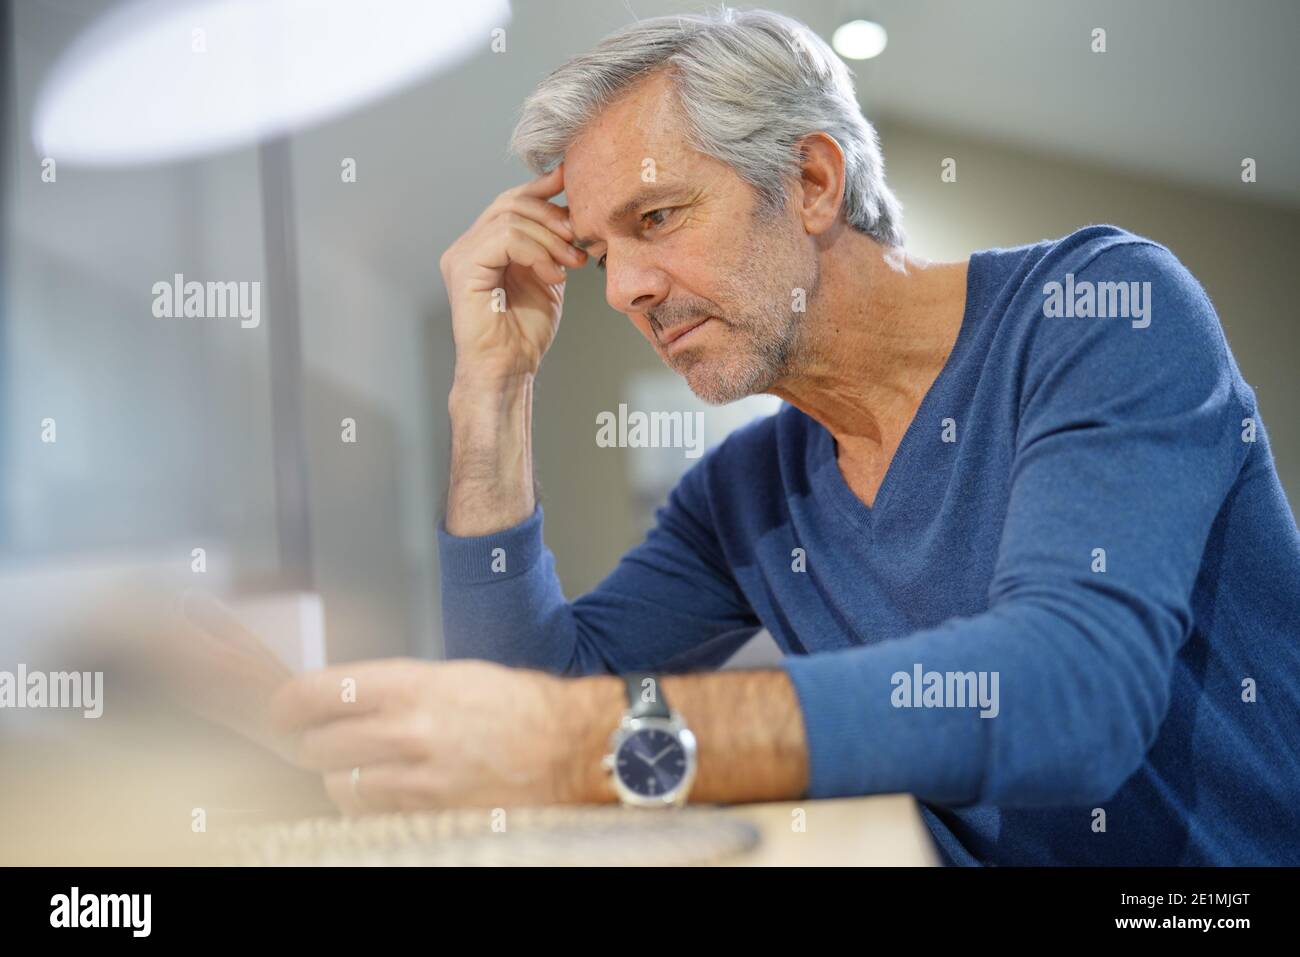 Senior man at home relaxing and reading newspaper Stock Photo